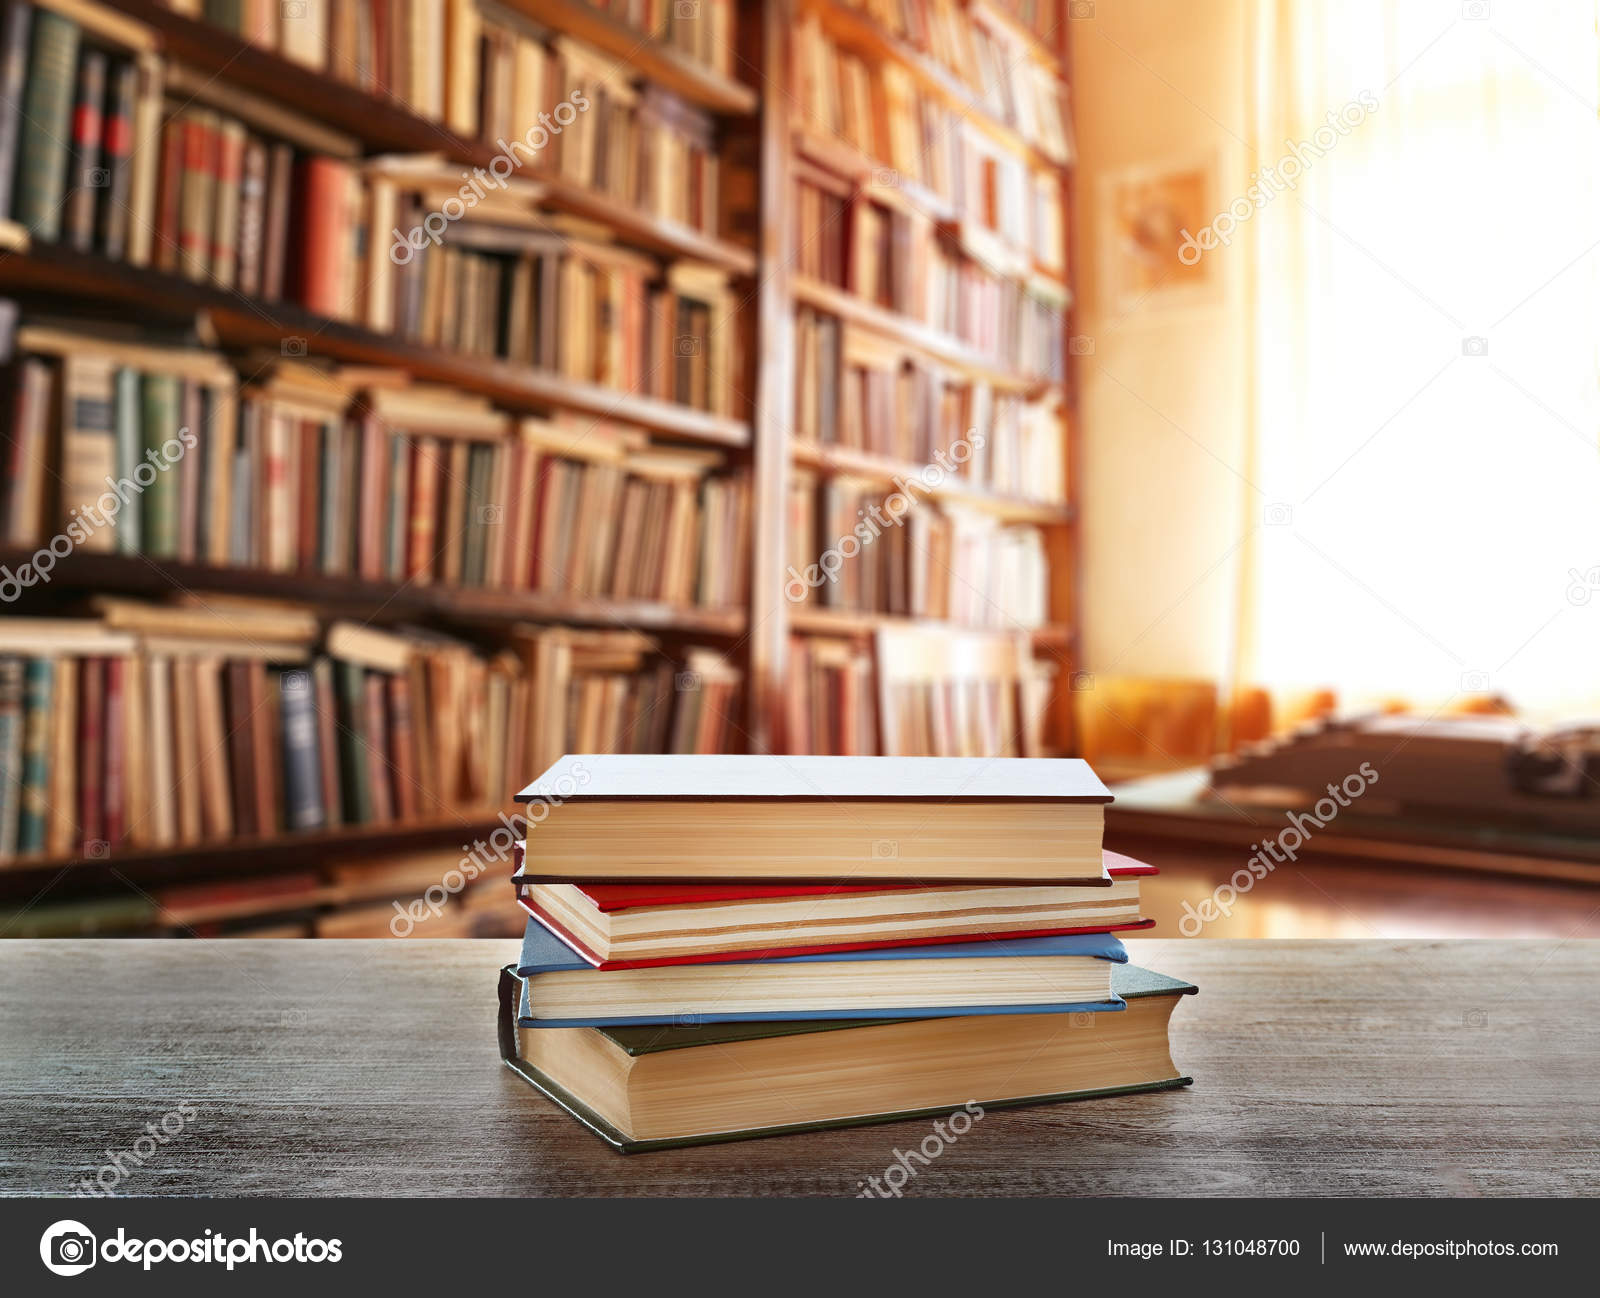 Stack of books on table — Stock Photo © belchonock #131048700